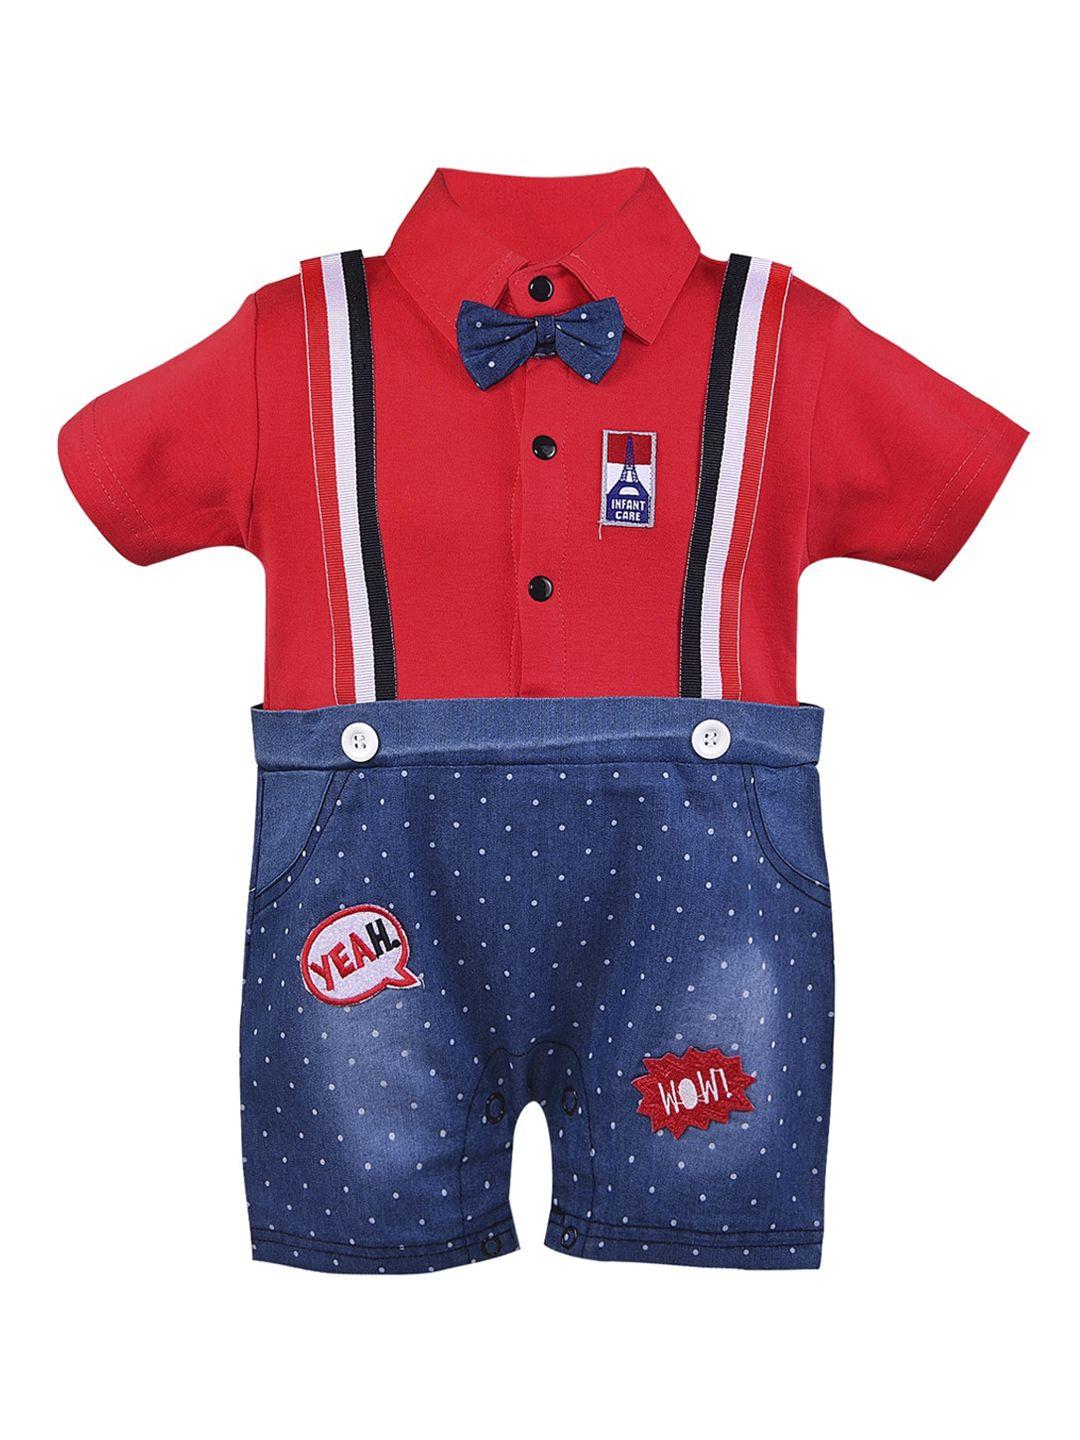 wish-karo-infant-boys-red-&-blue-colourblocked-rompers